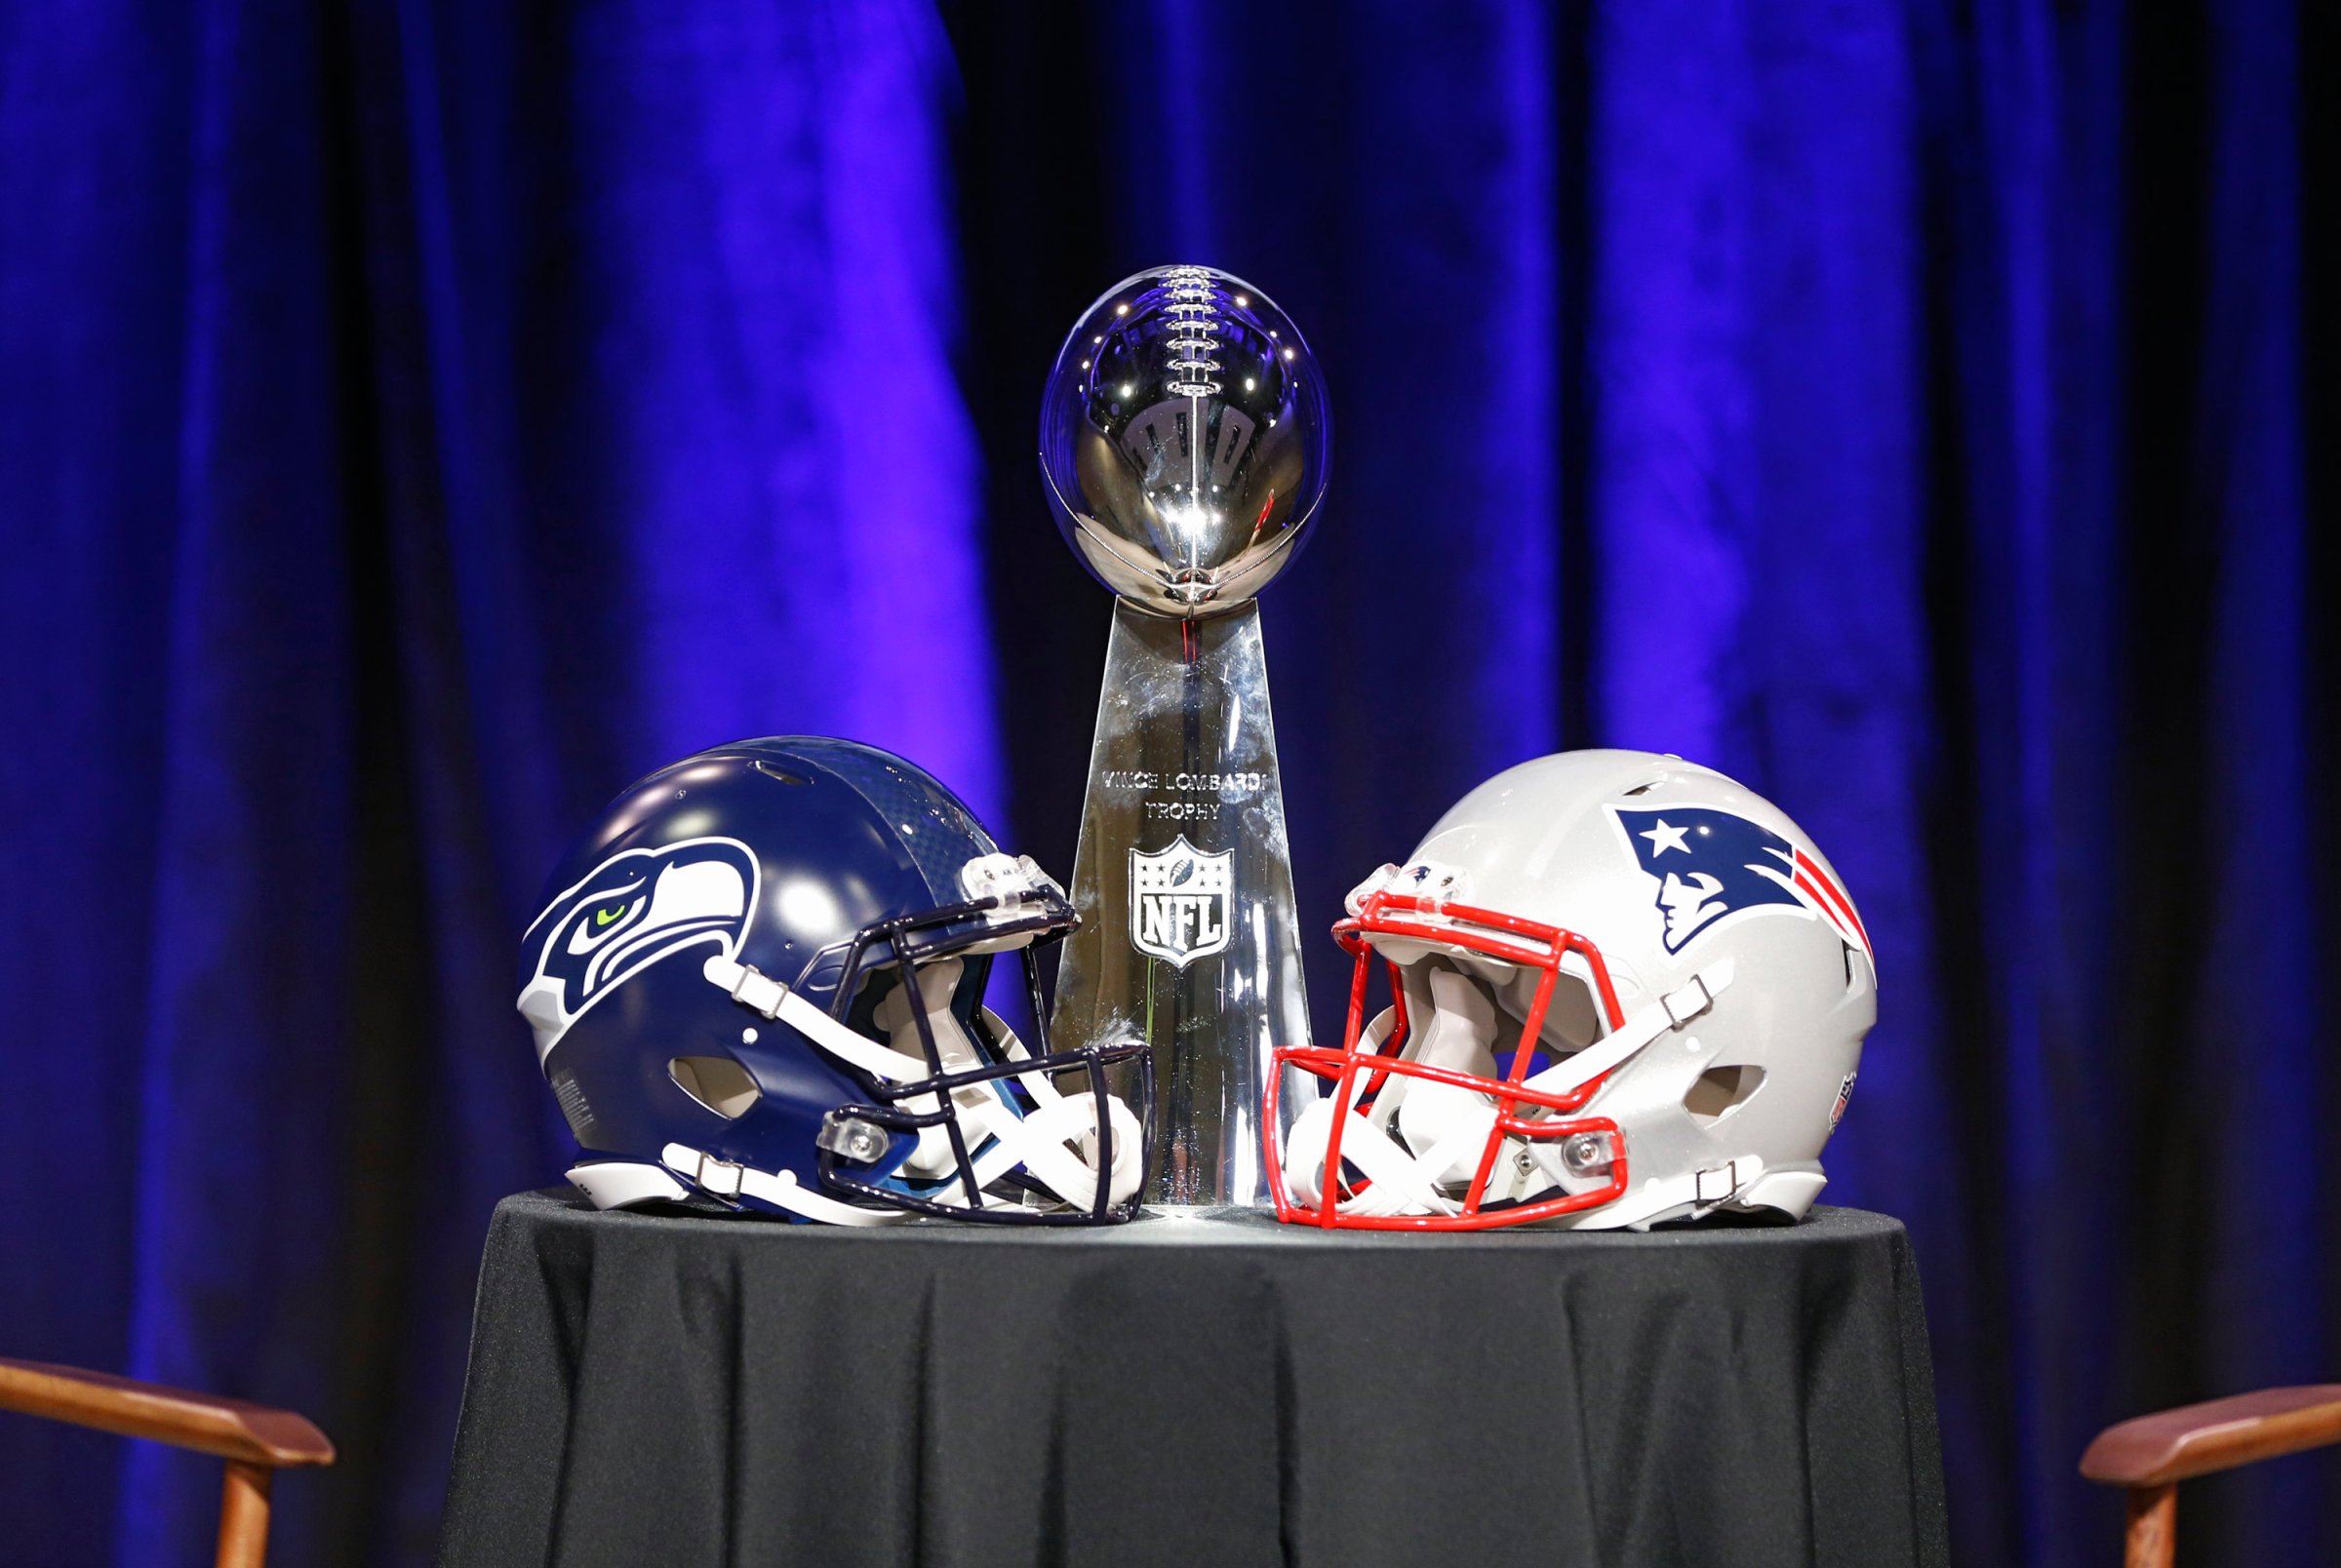 General view of the Super Bowl XLIX trophy with a helmet from both the Seattle Seahawks and the New England Patriots during a press conference for Super Bowl XLIX on Friday, Jan. 30, 2015, in Phoenix, Ariz.